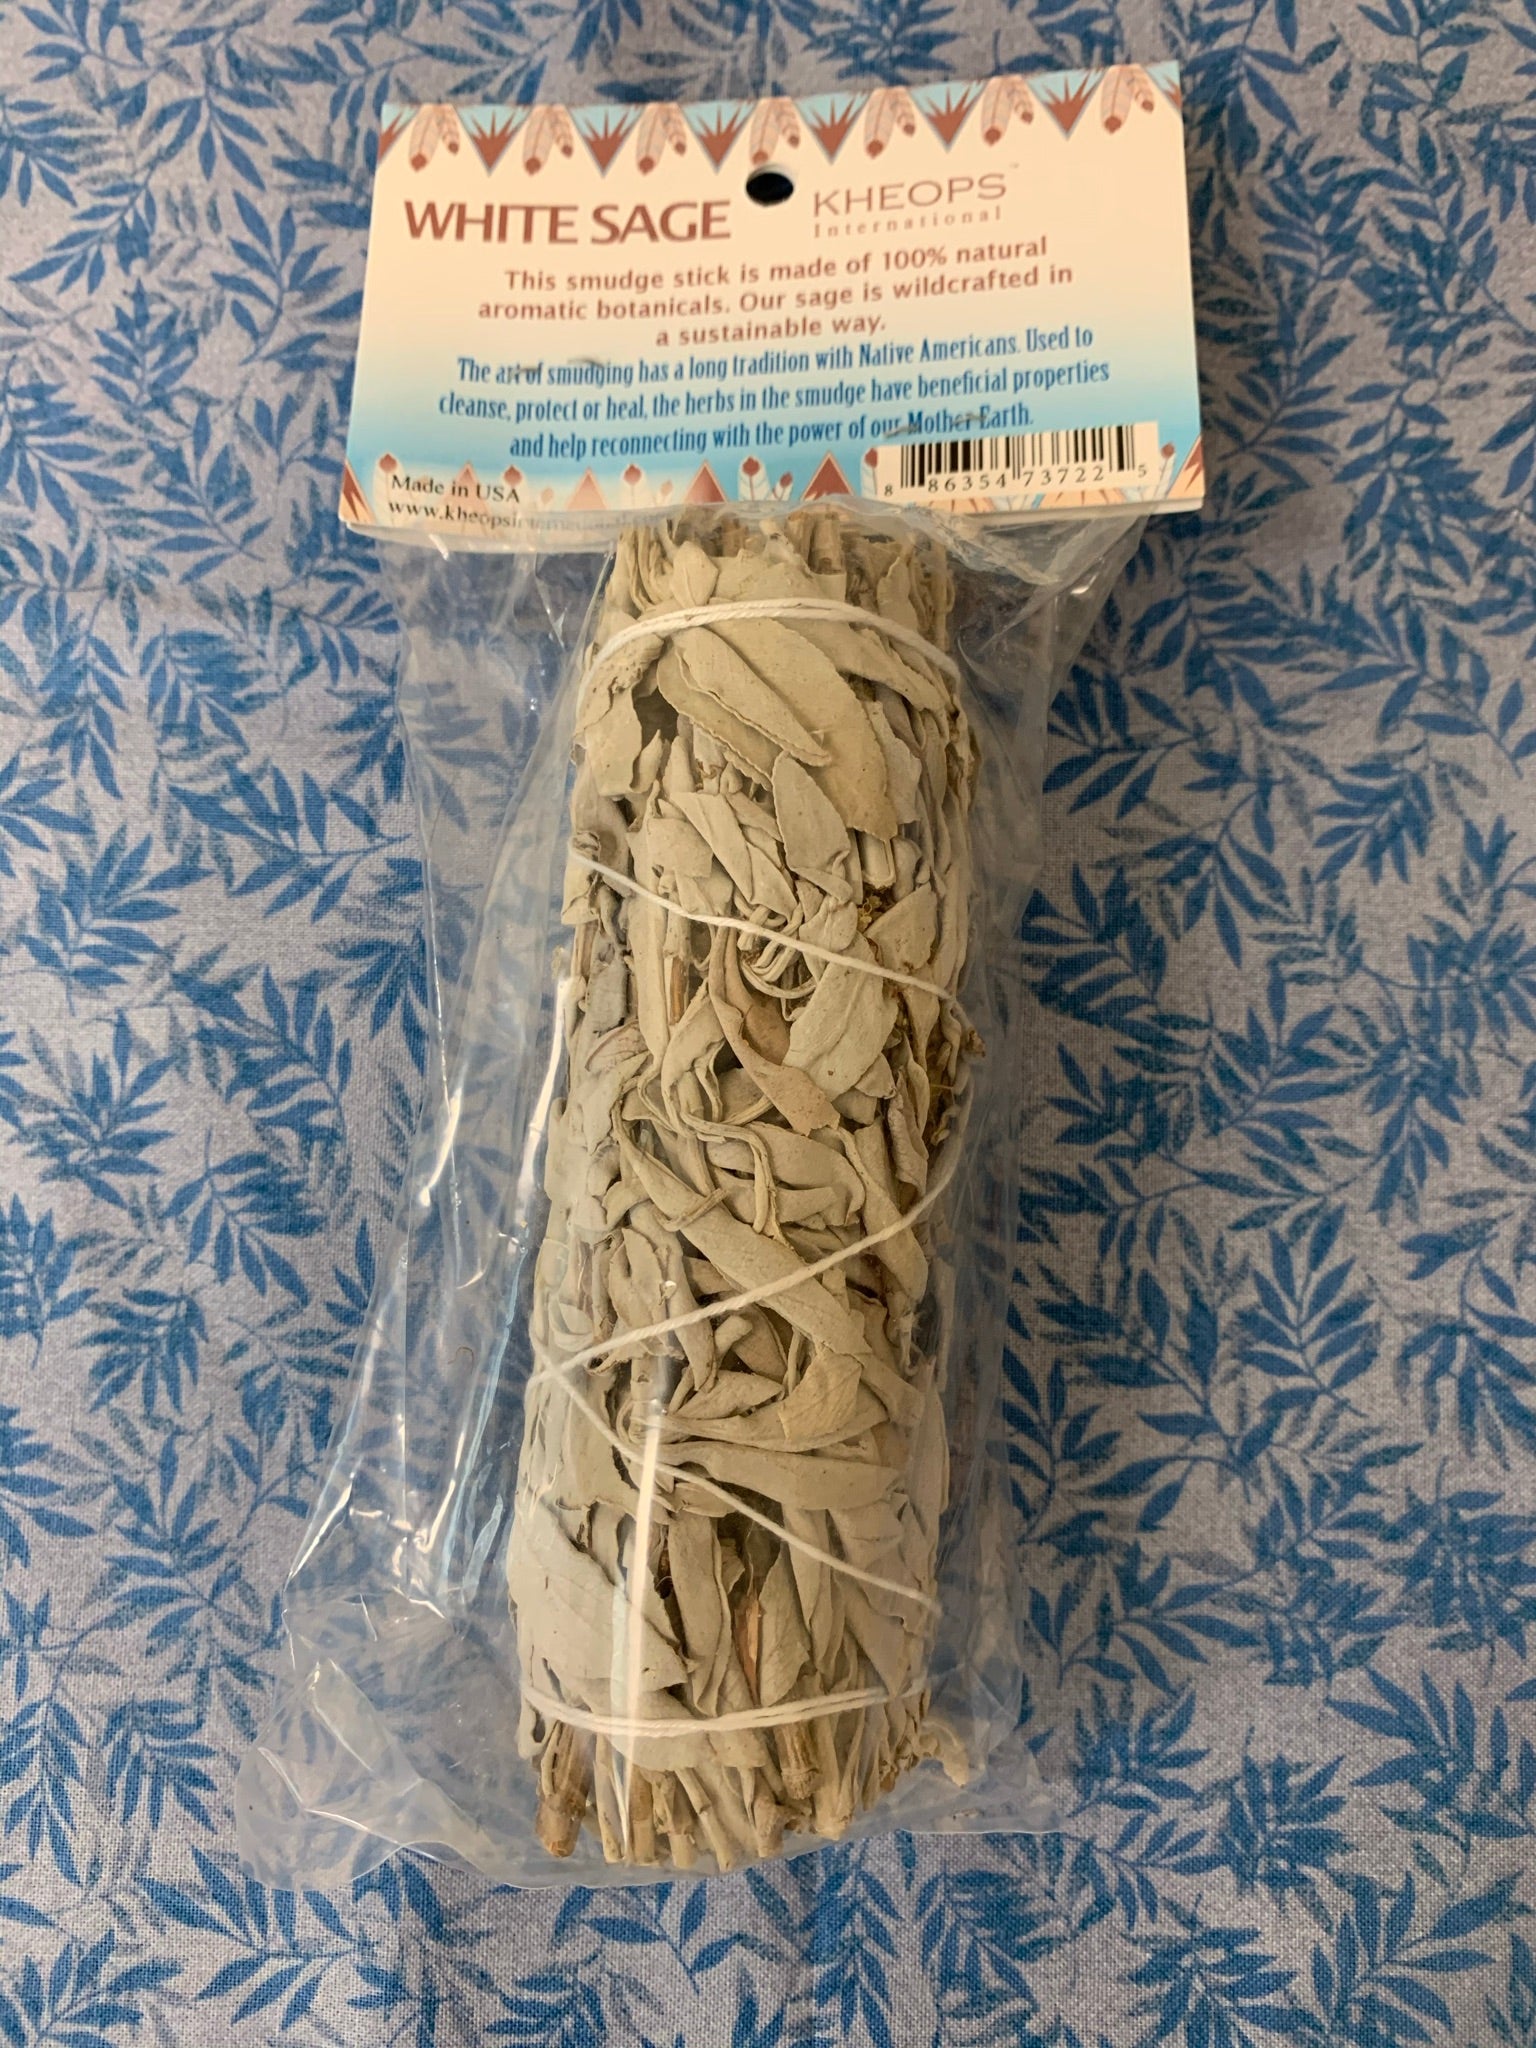 This white sage smudge stick is made of 100% natural botanicals and sustainable methods are used in wildcrafting it. Smudging with sage has its roots in Native American traditions. Use it to: *Cleanse, clear & purify your space or environment - home, office,  *Cleanse, clear or purify a person & their energy *Promote healing *Promote clarity of mind *Clear out spiritual impurities  *Enhance ceremony or ritual  This smudge stick is approximately 6"x1½".   *This product includes 1 sage stick only. Any other i